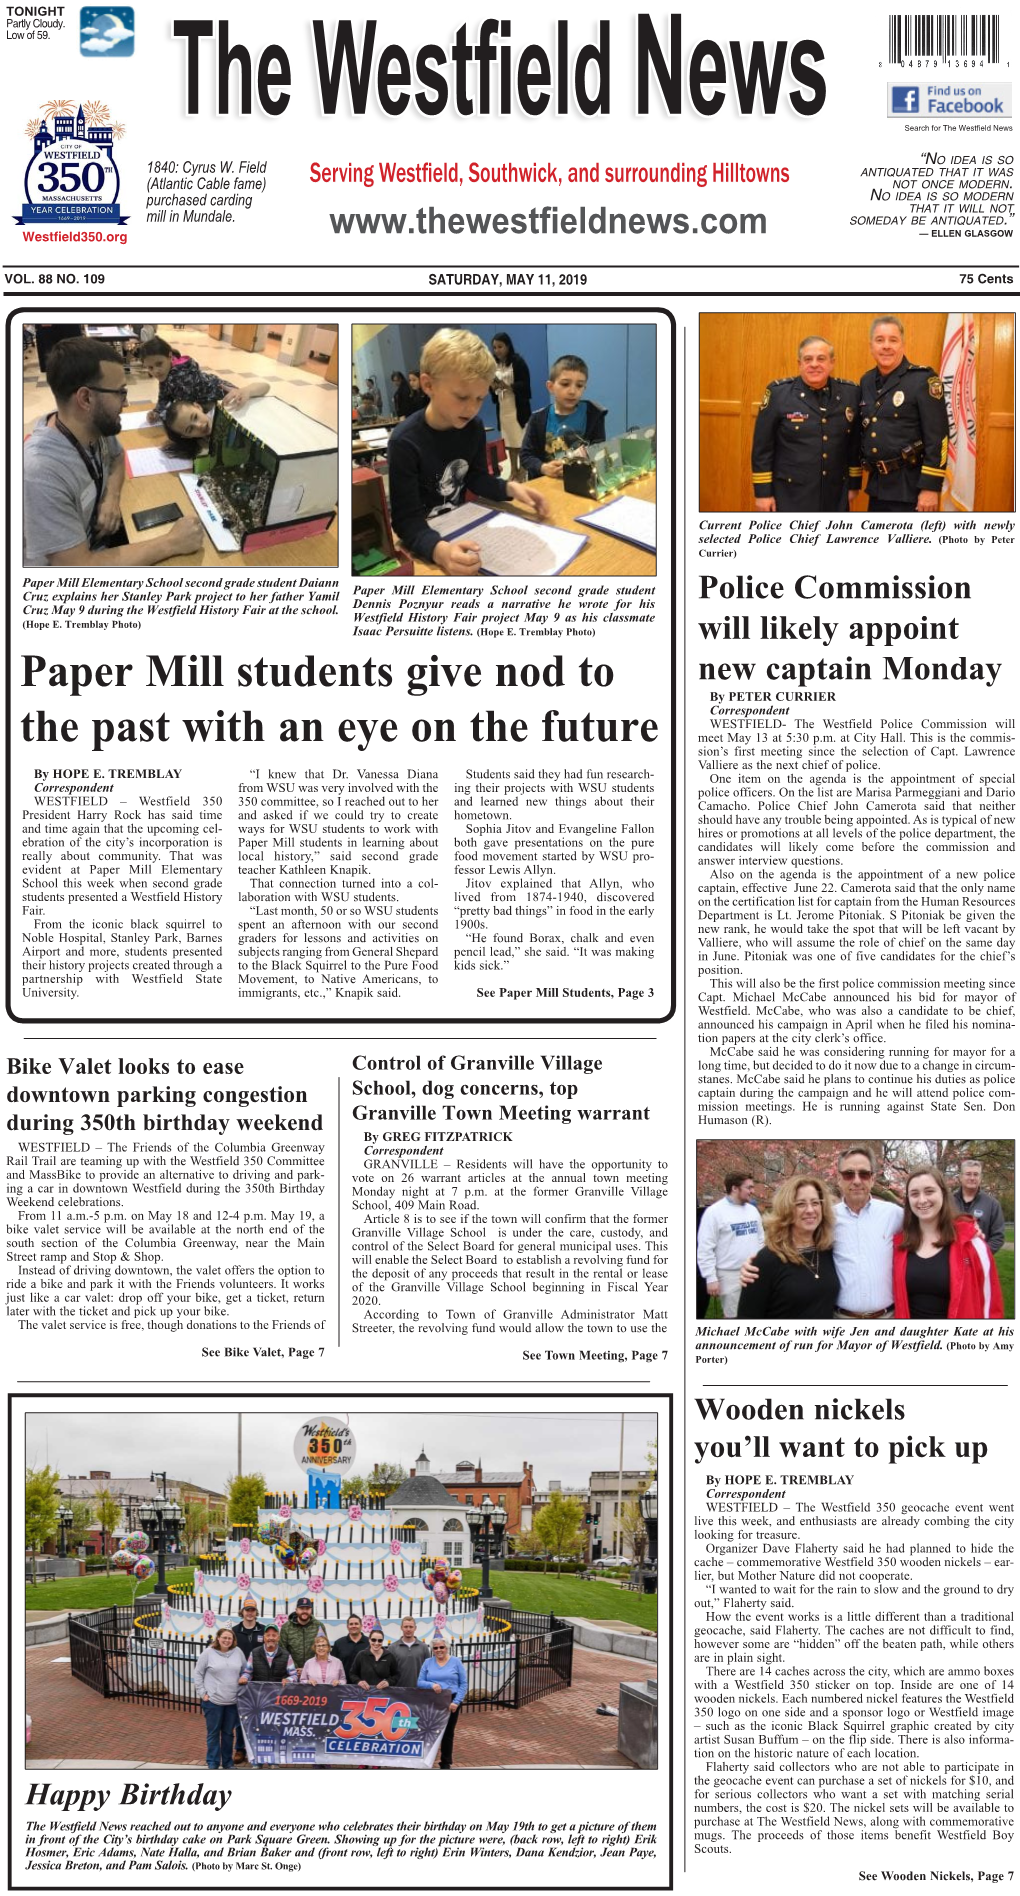 Paper Mill Students Give Nod to the Past with an Eye on the Future